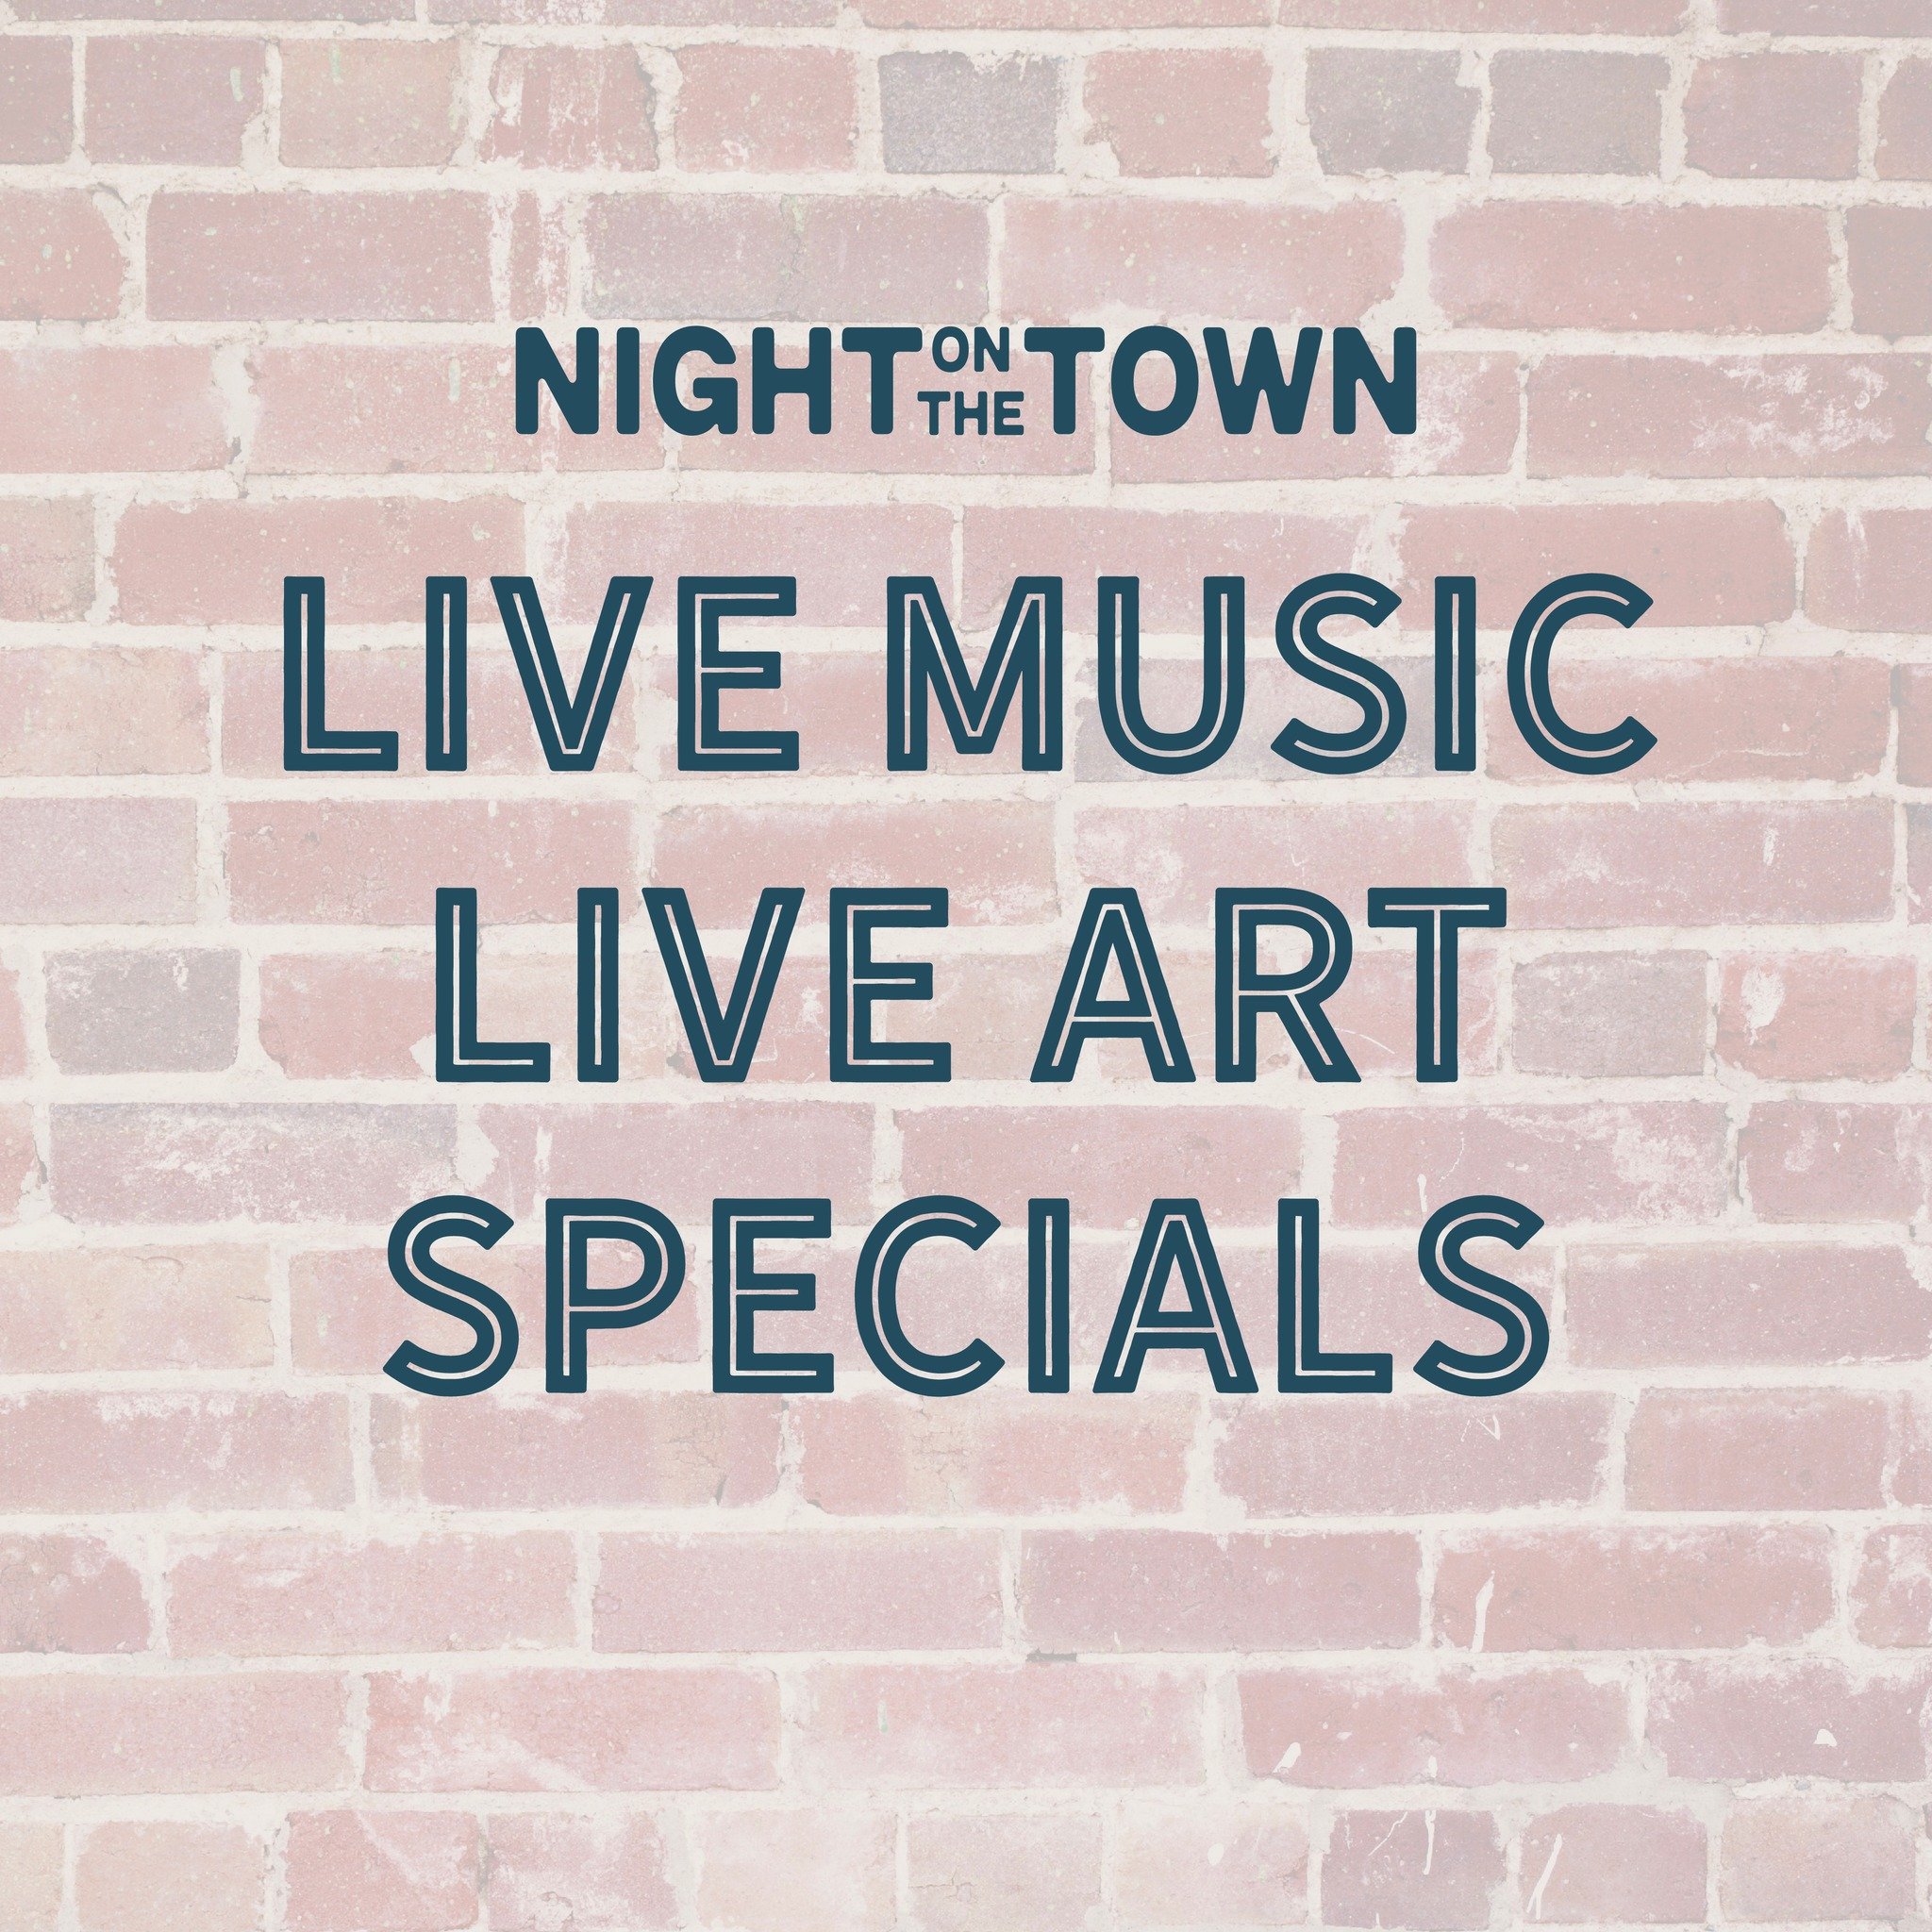 Starting this month, you can find artists and musicians out on the streets of Downtown Loveland during Night on the Town! Mark your calendar for Friday, May 10th! Come downtown to check out multiple art openings, downtown events, plus bars and restau